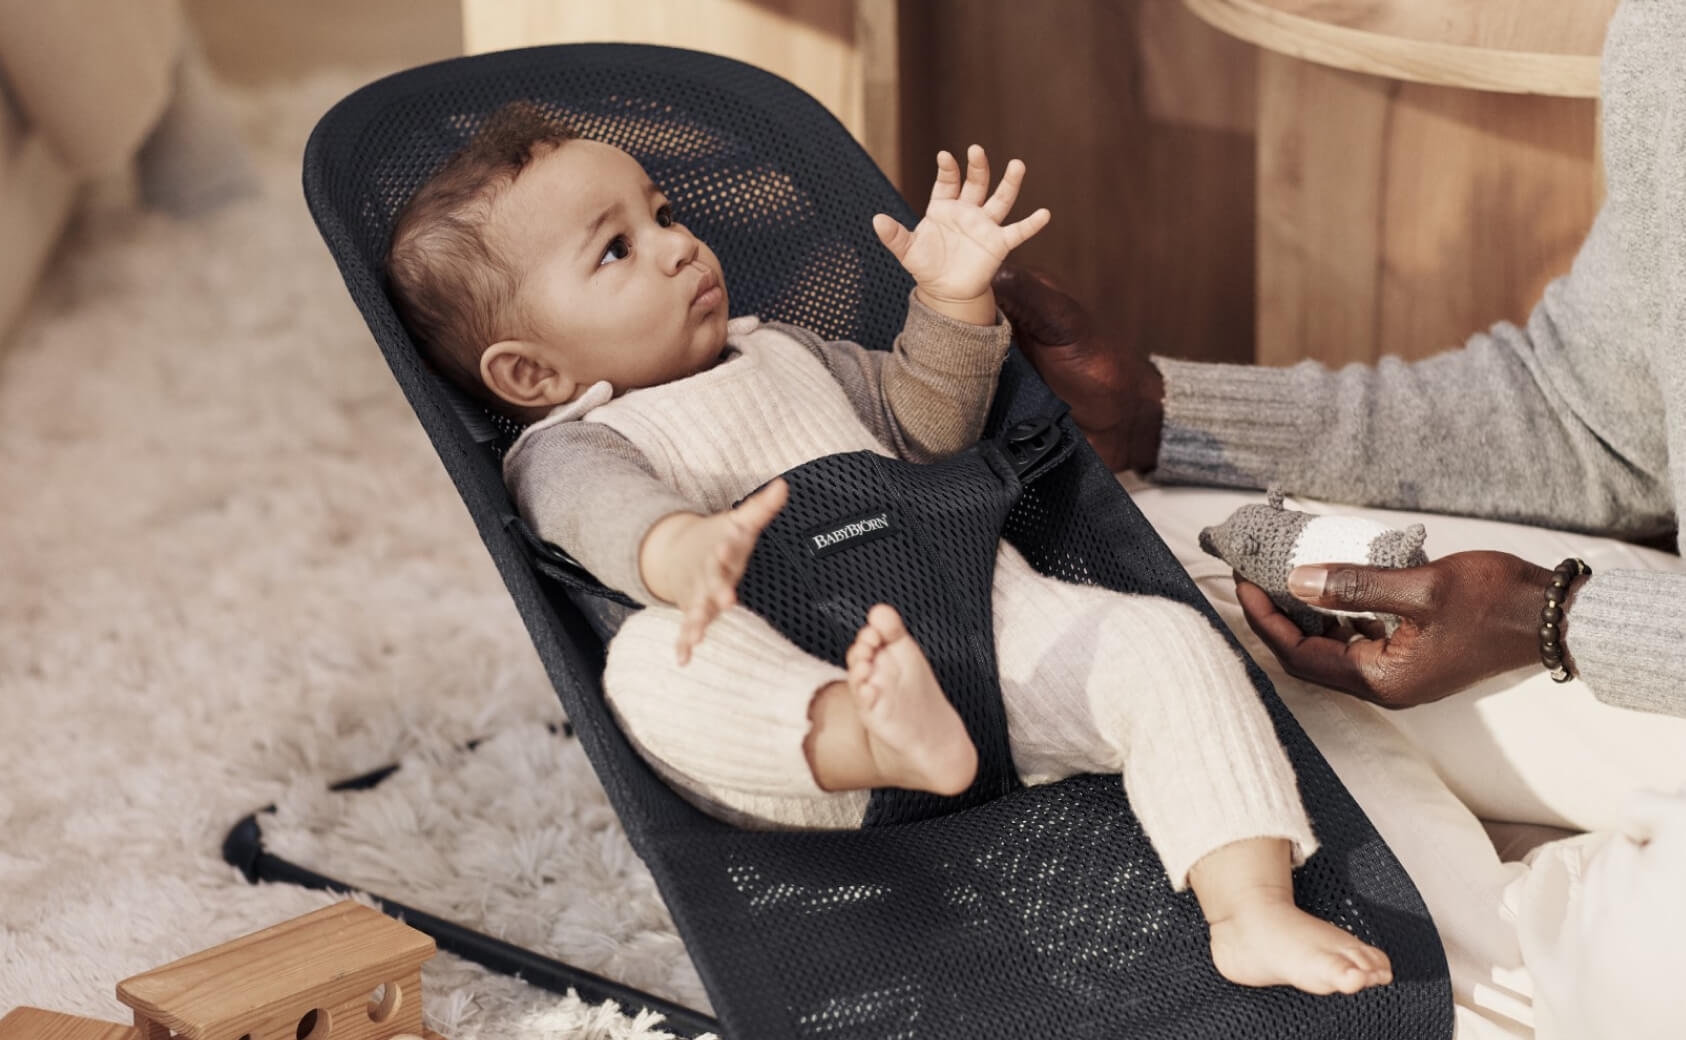 A baby sitting in a black mesh bouncer from BabyBjorn.